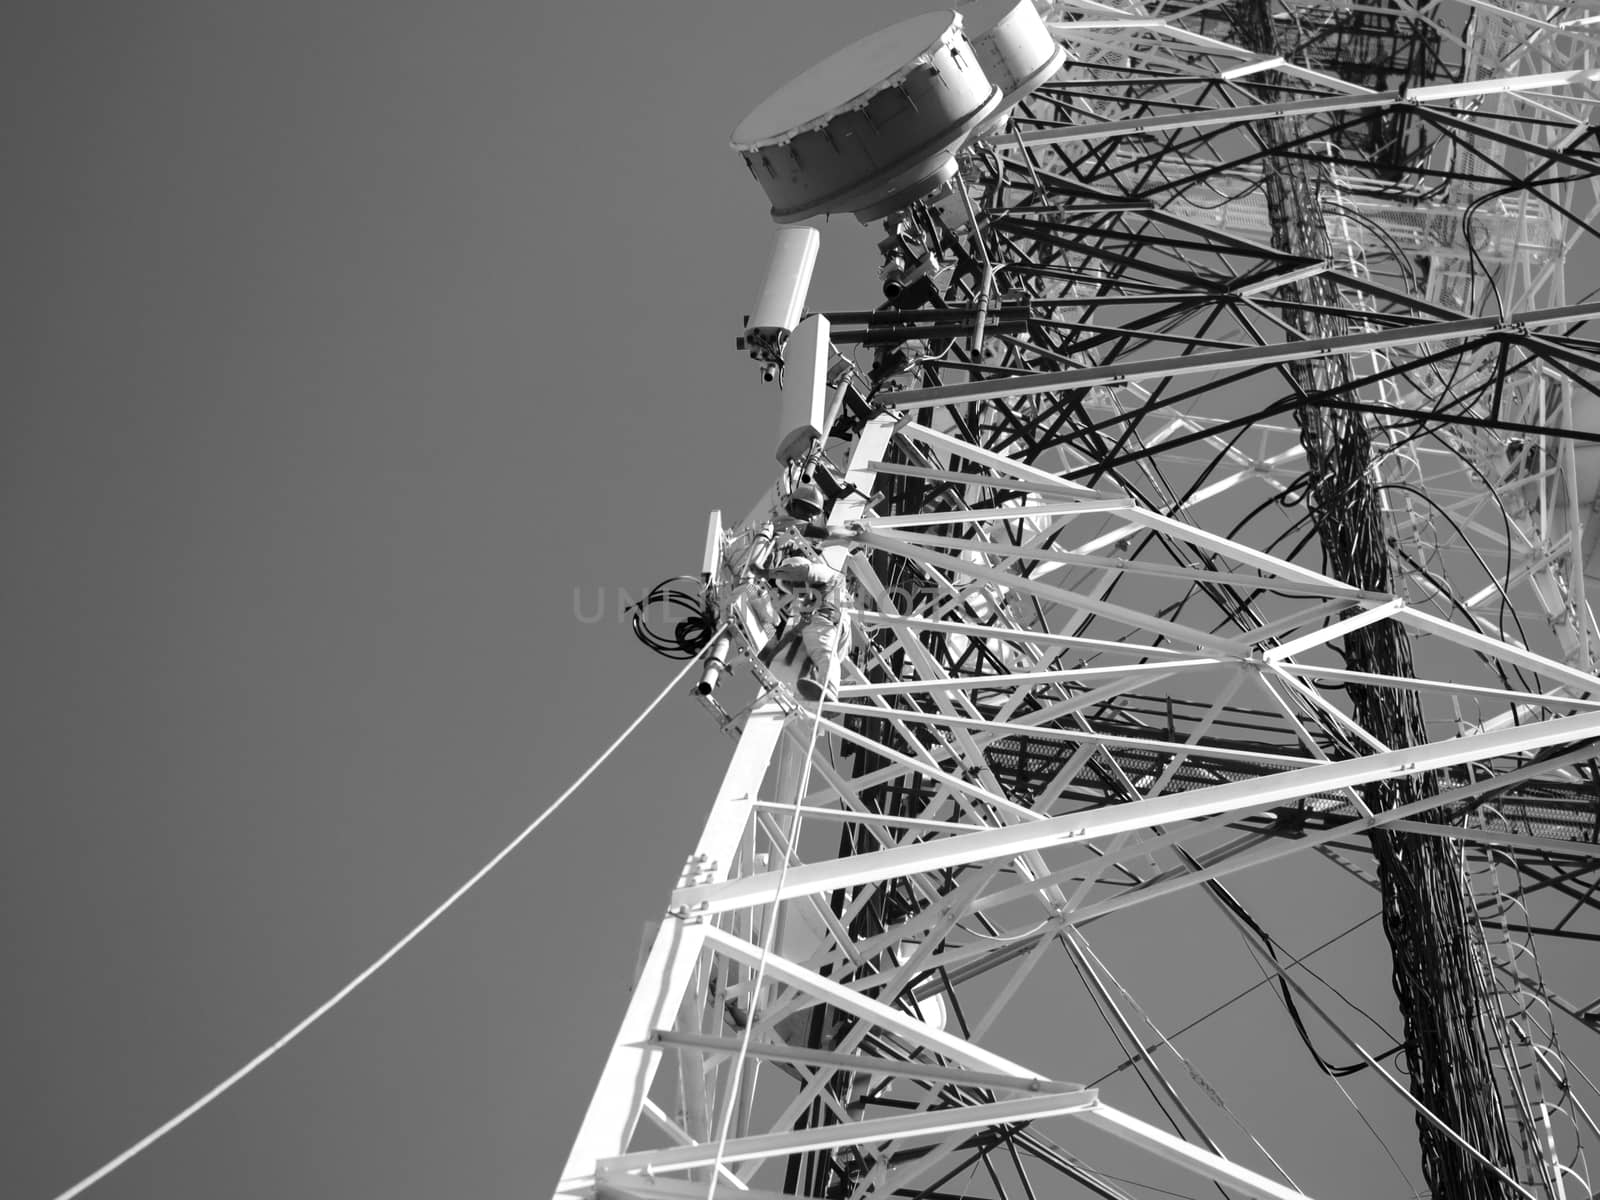 TELECOM WORKERS REPAIRING CABLES ON TOWER by PrettyTG